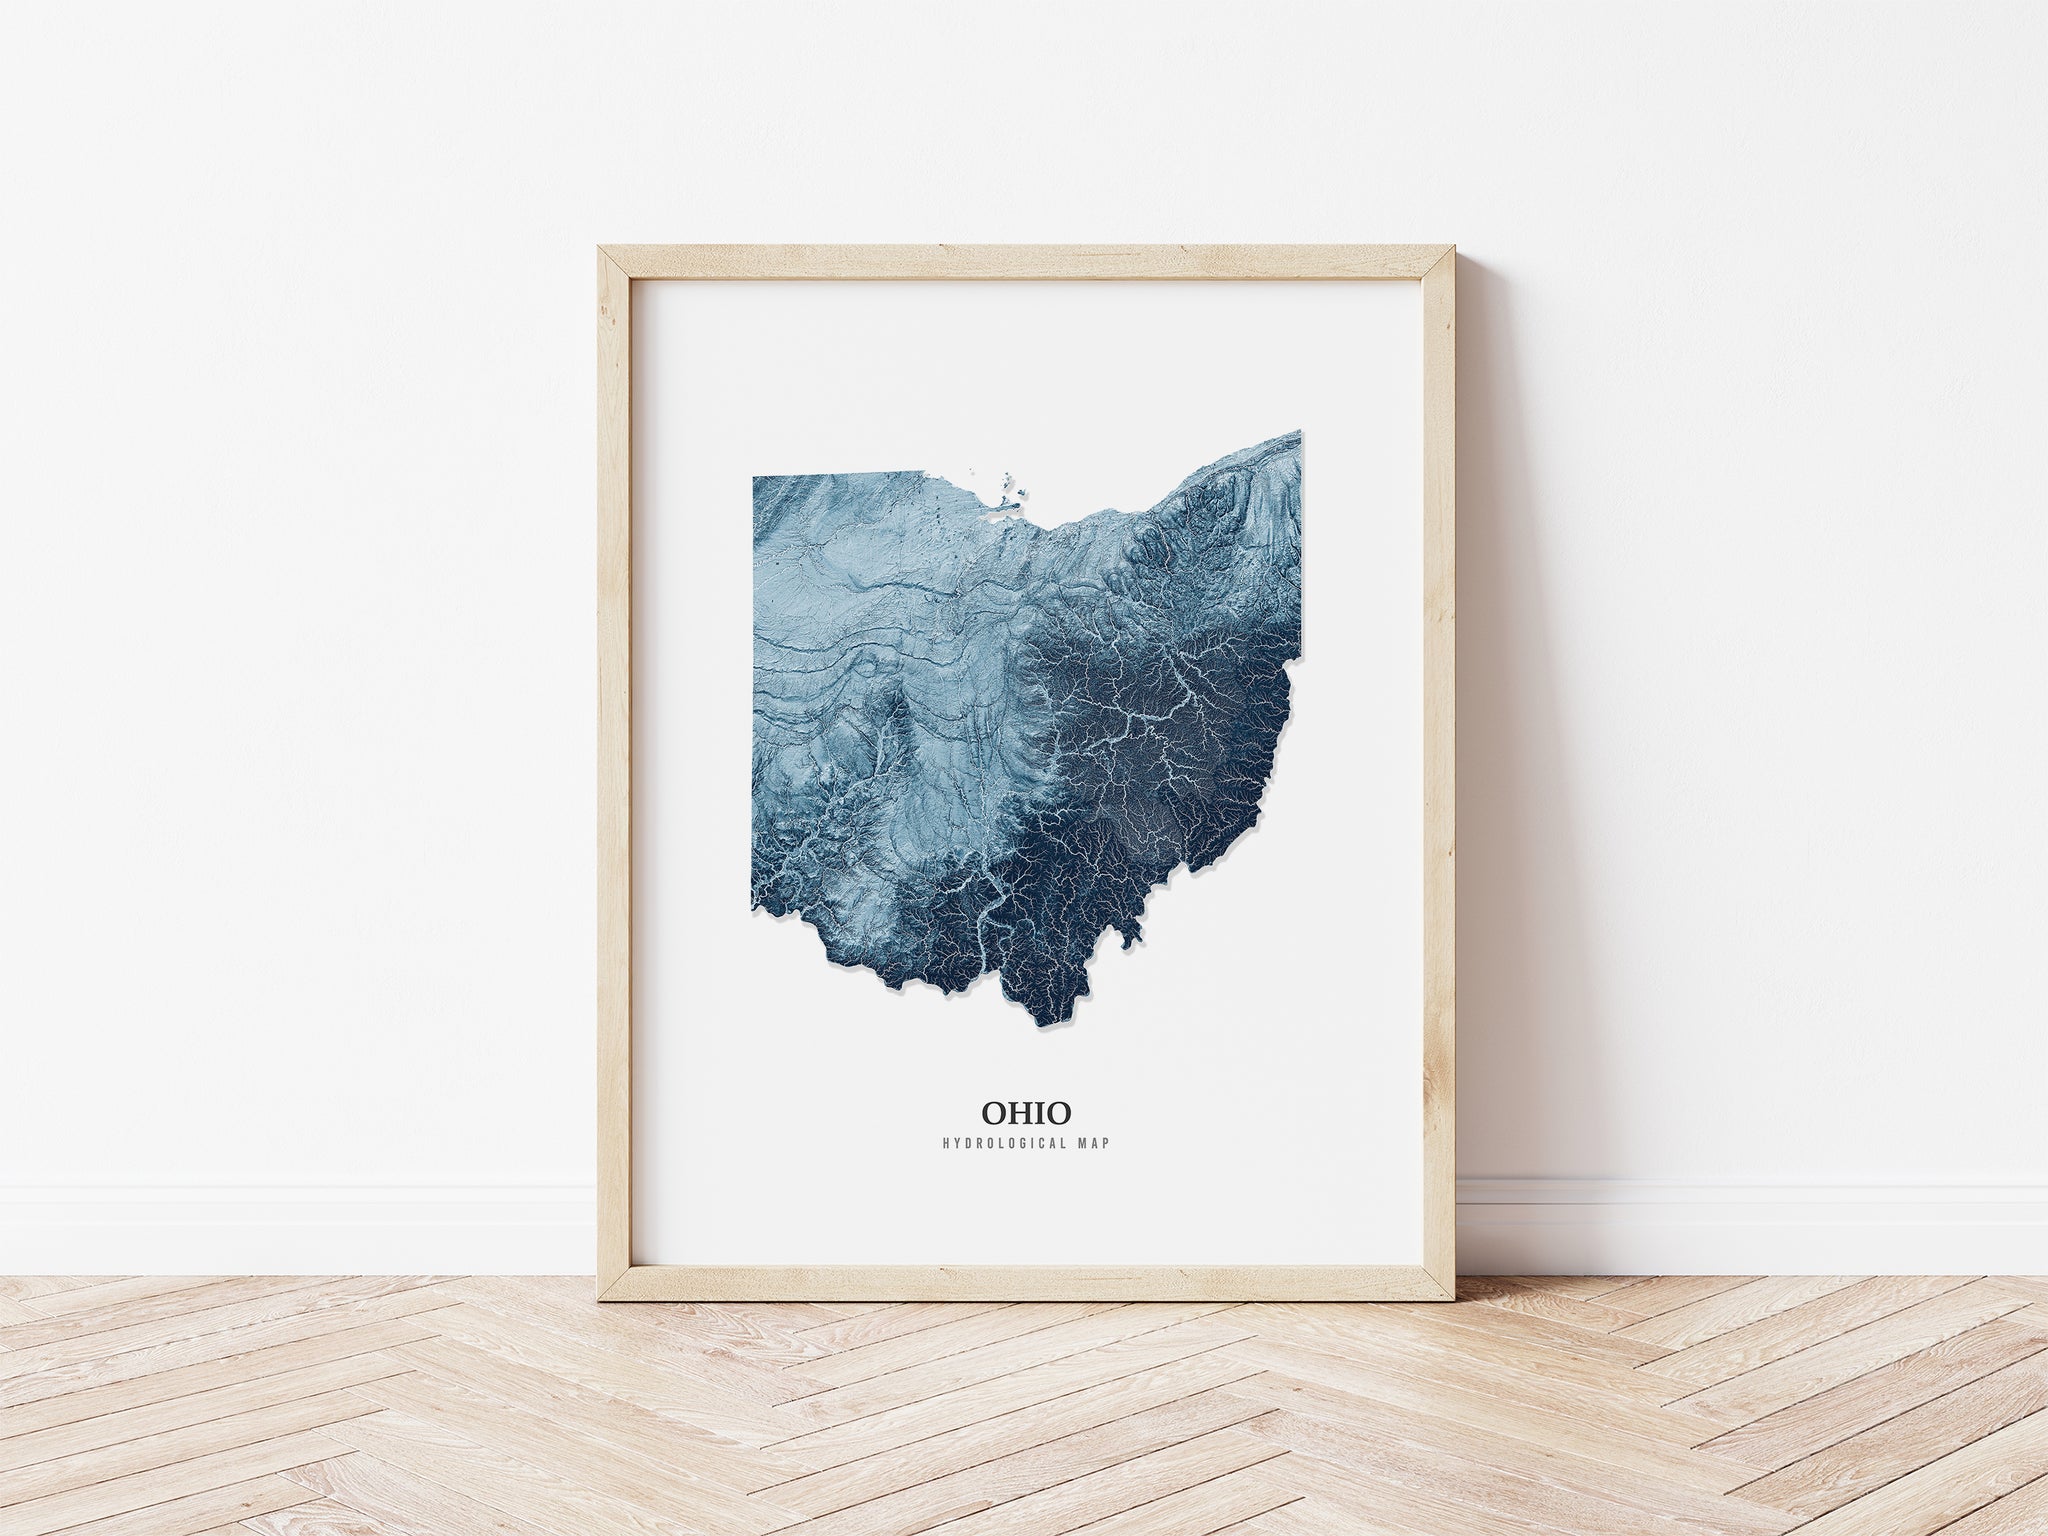 Ohio Hydrological Map Poster Blue